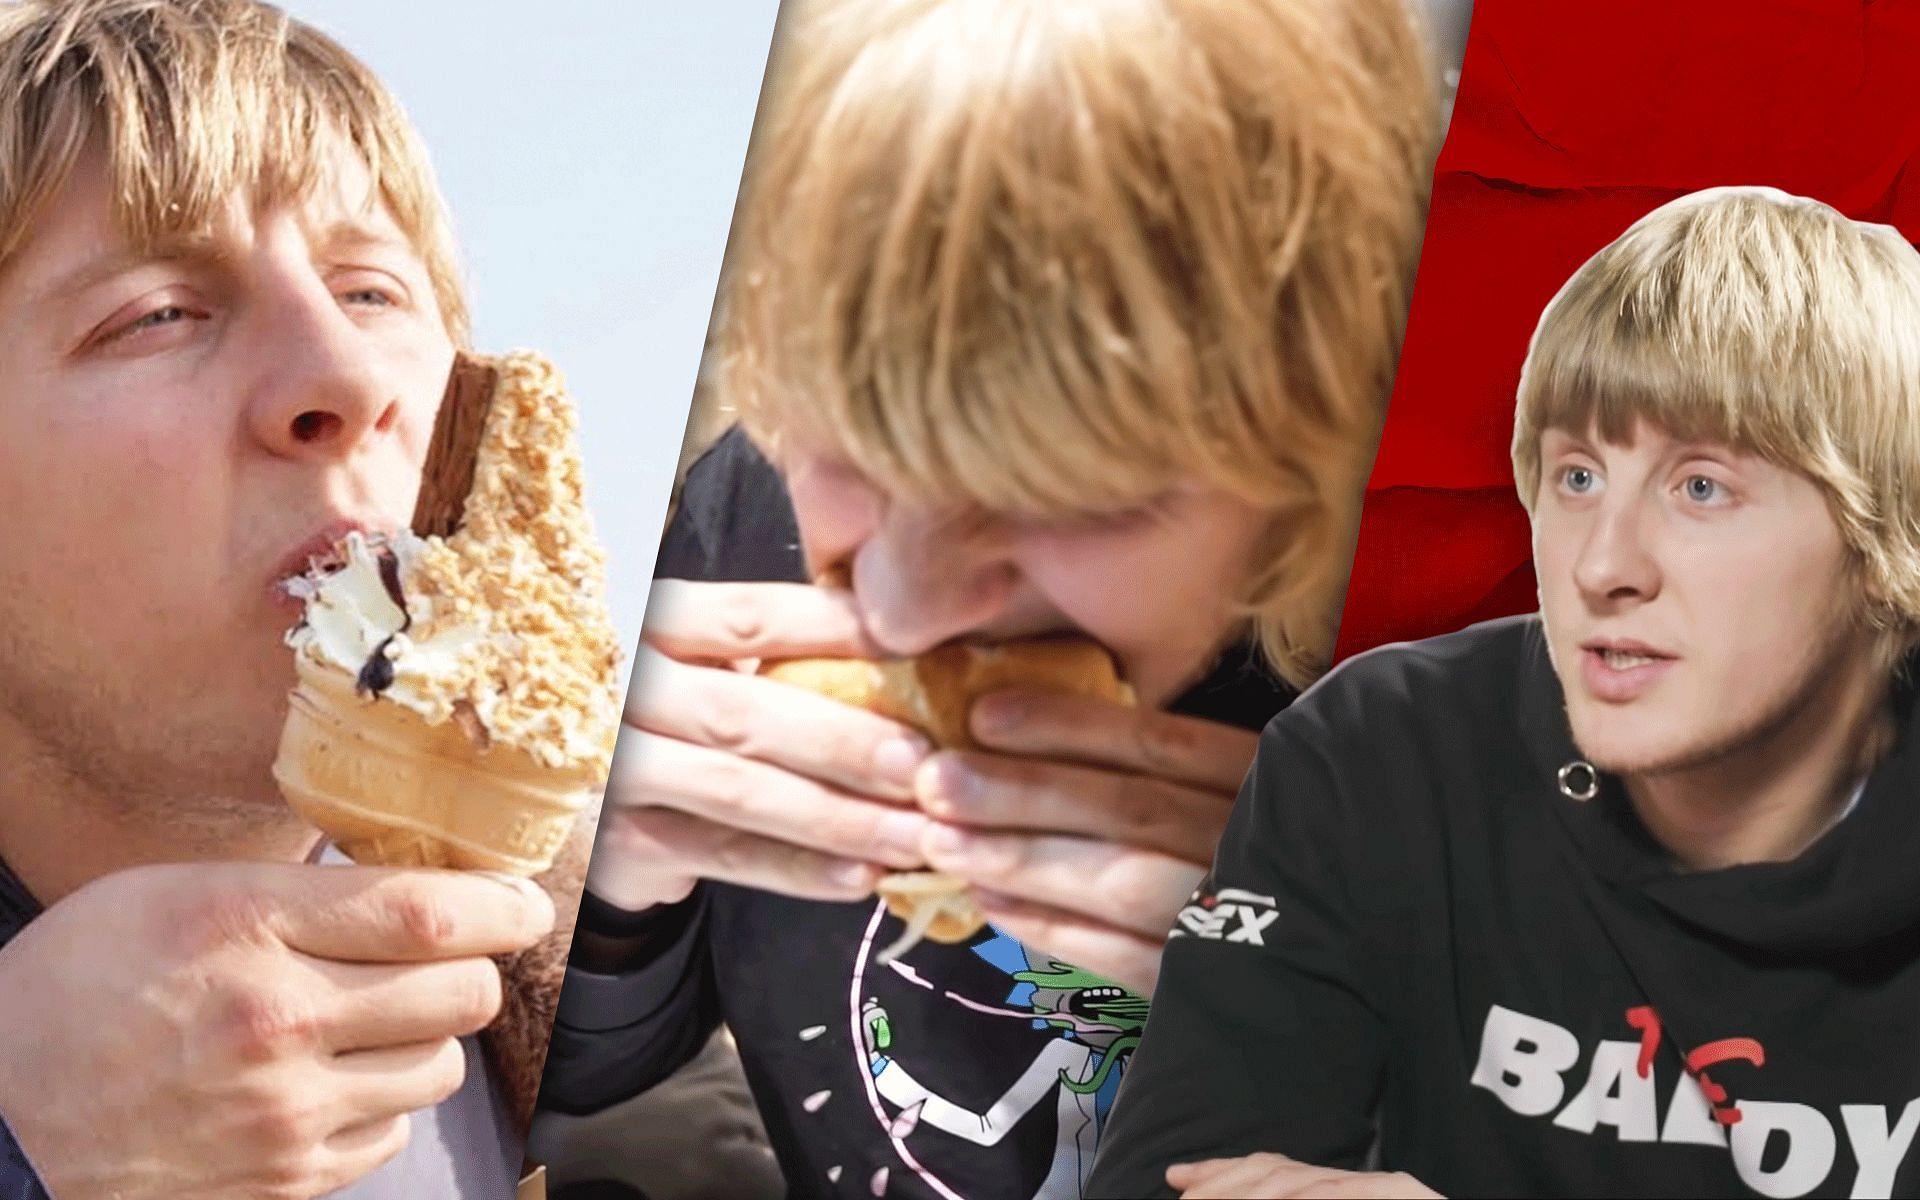 Paddy Pimblett is known for his love of junk food [Image Courtesy: UFC and Paddy The Baddy on YouTube]